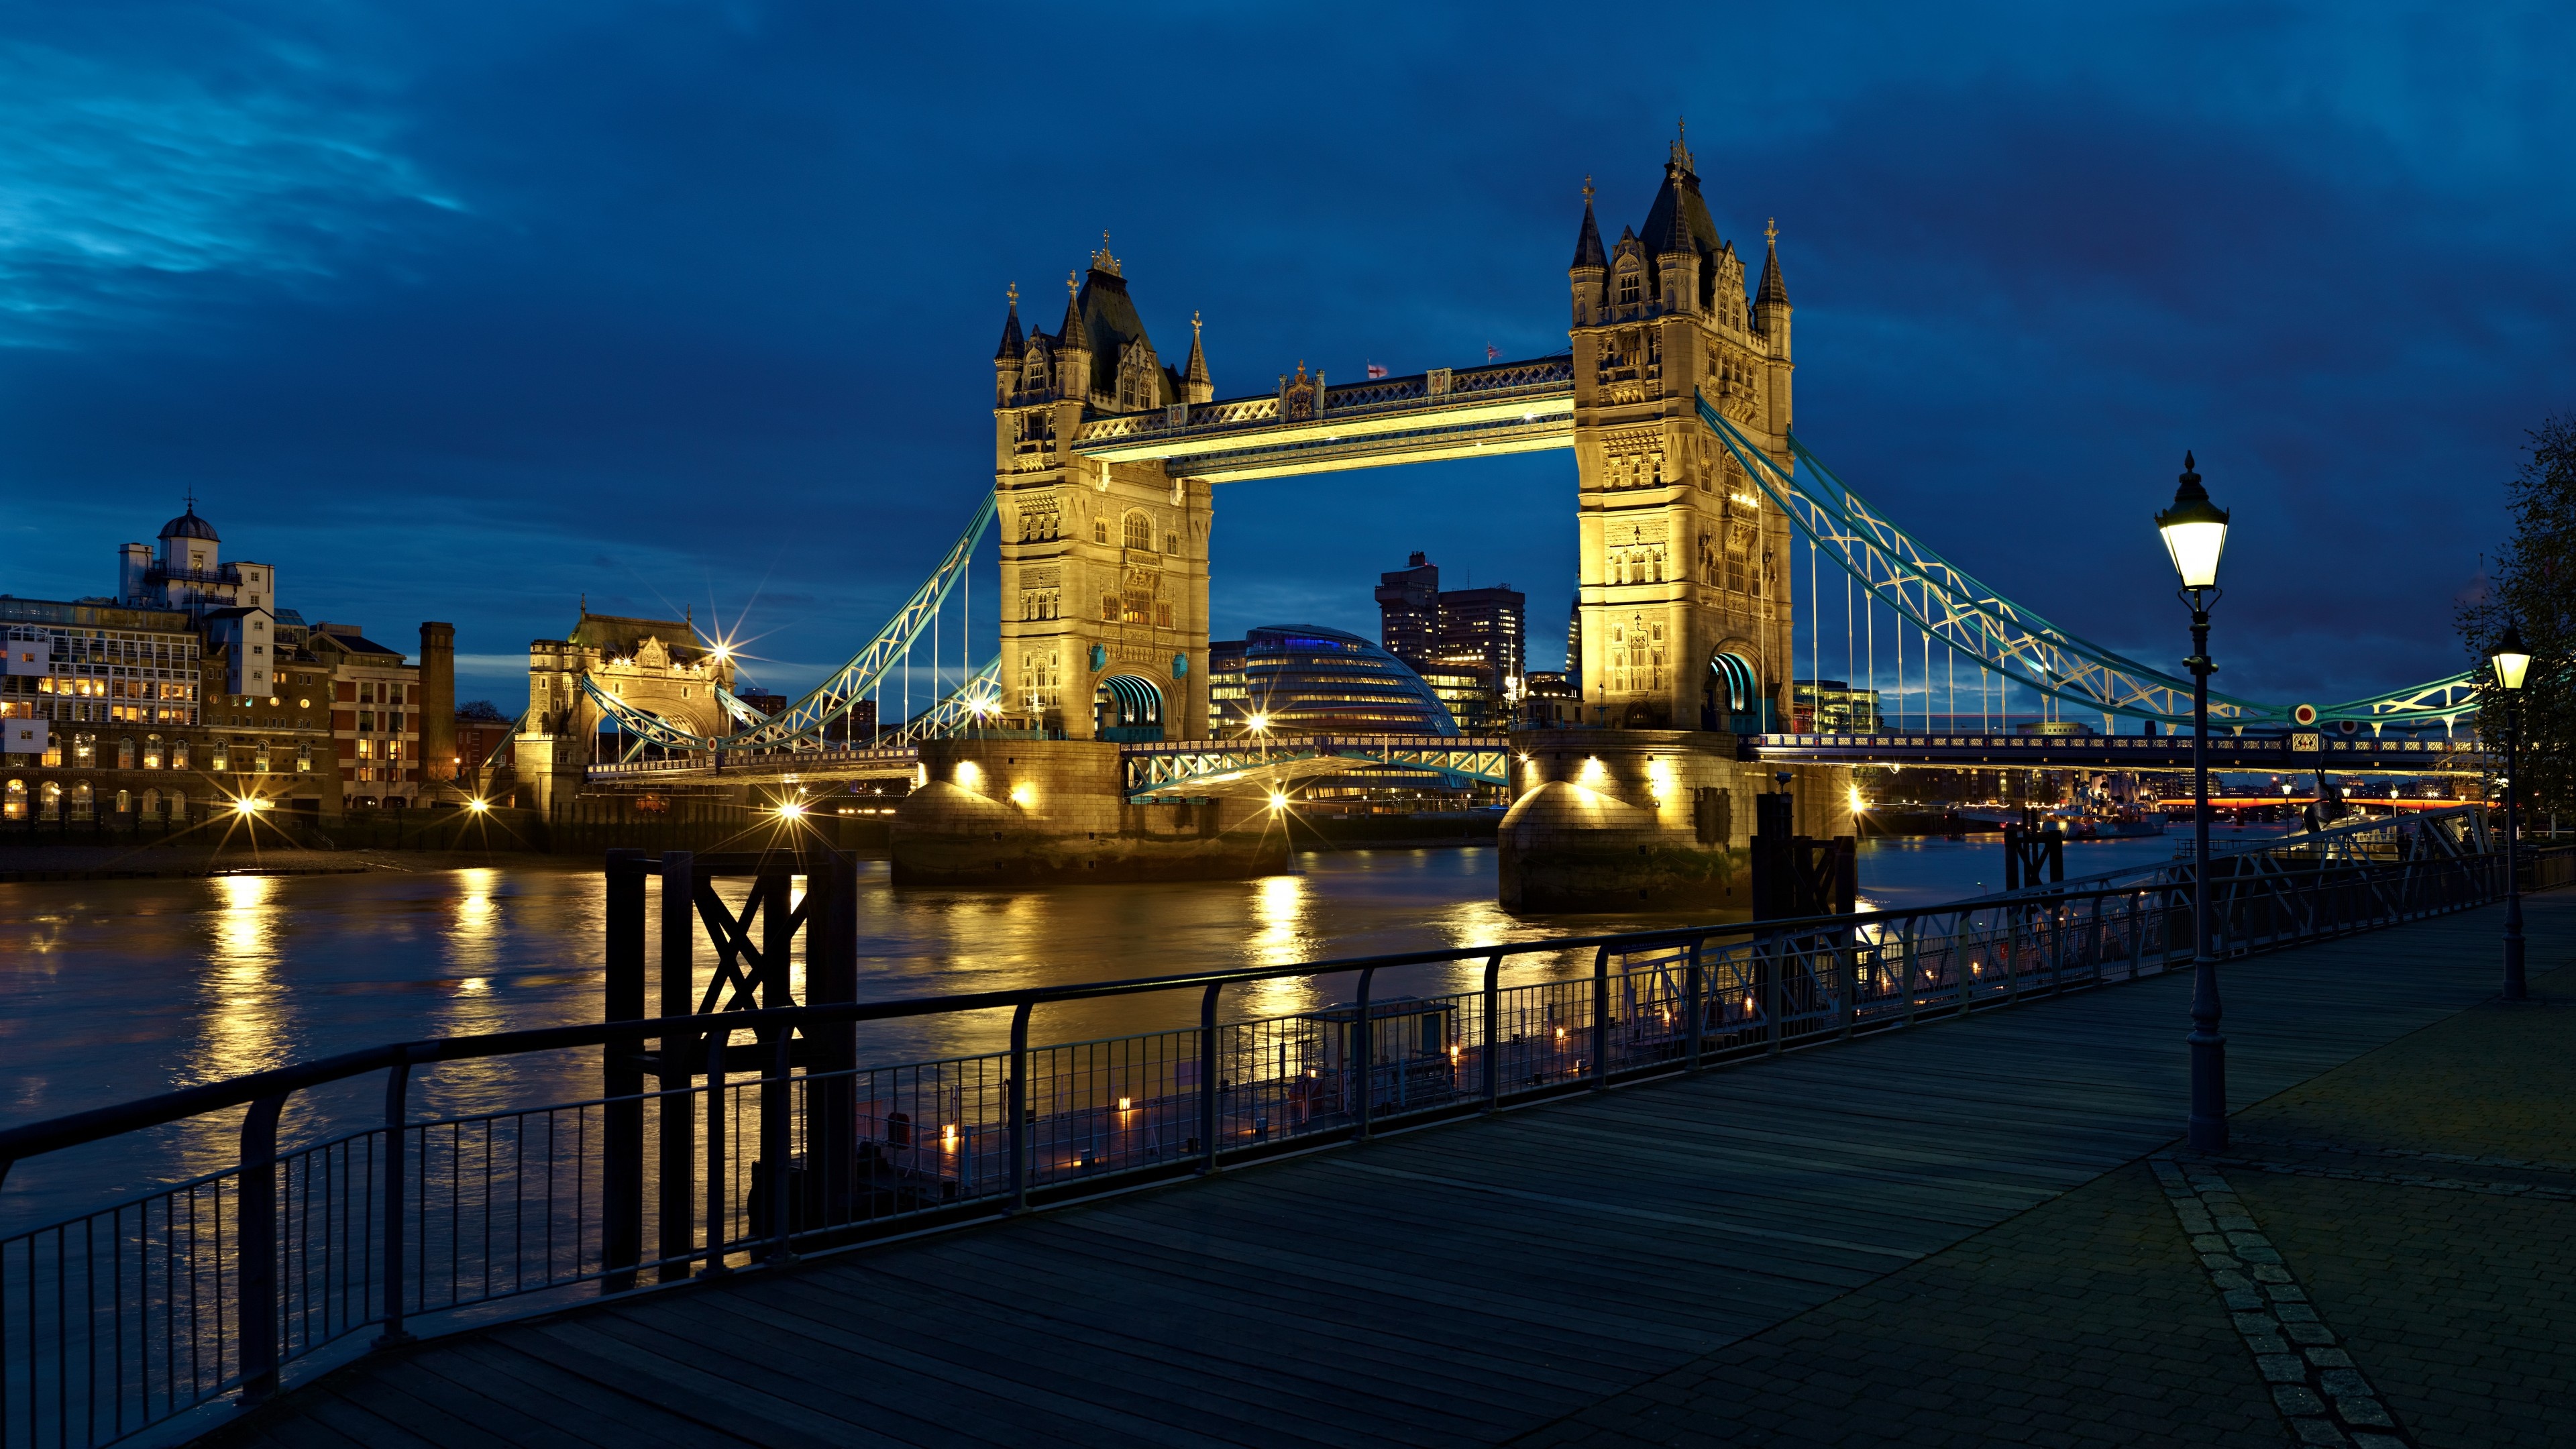 Bridge: London Tower Drawbridge, One of the most famous historic places in the UK. 3840x2160 4K Wallpaper.